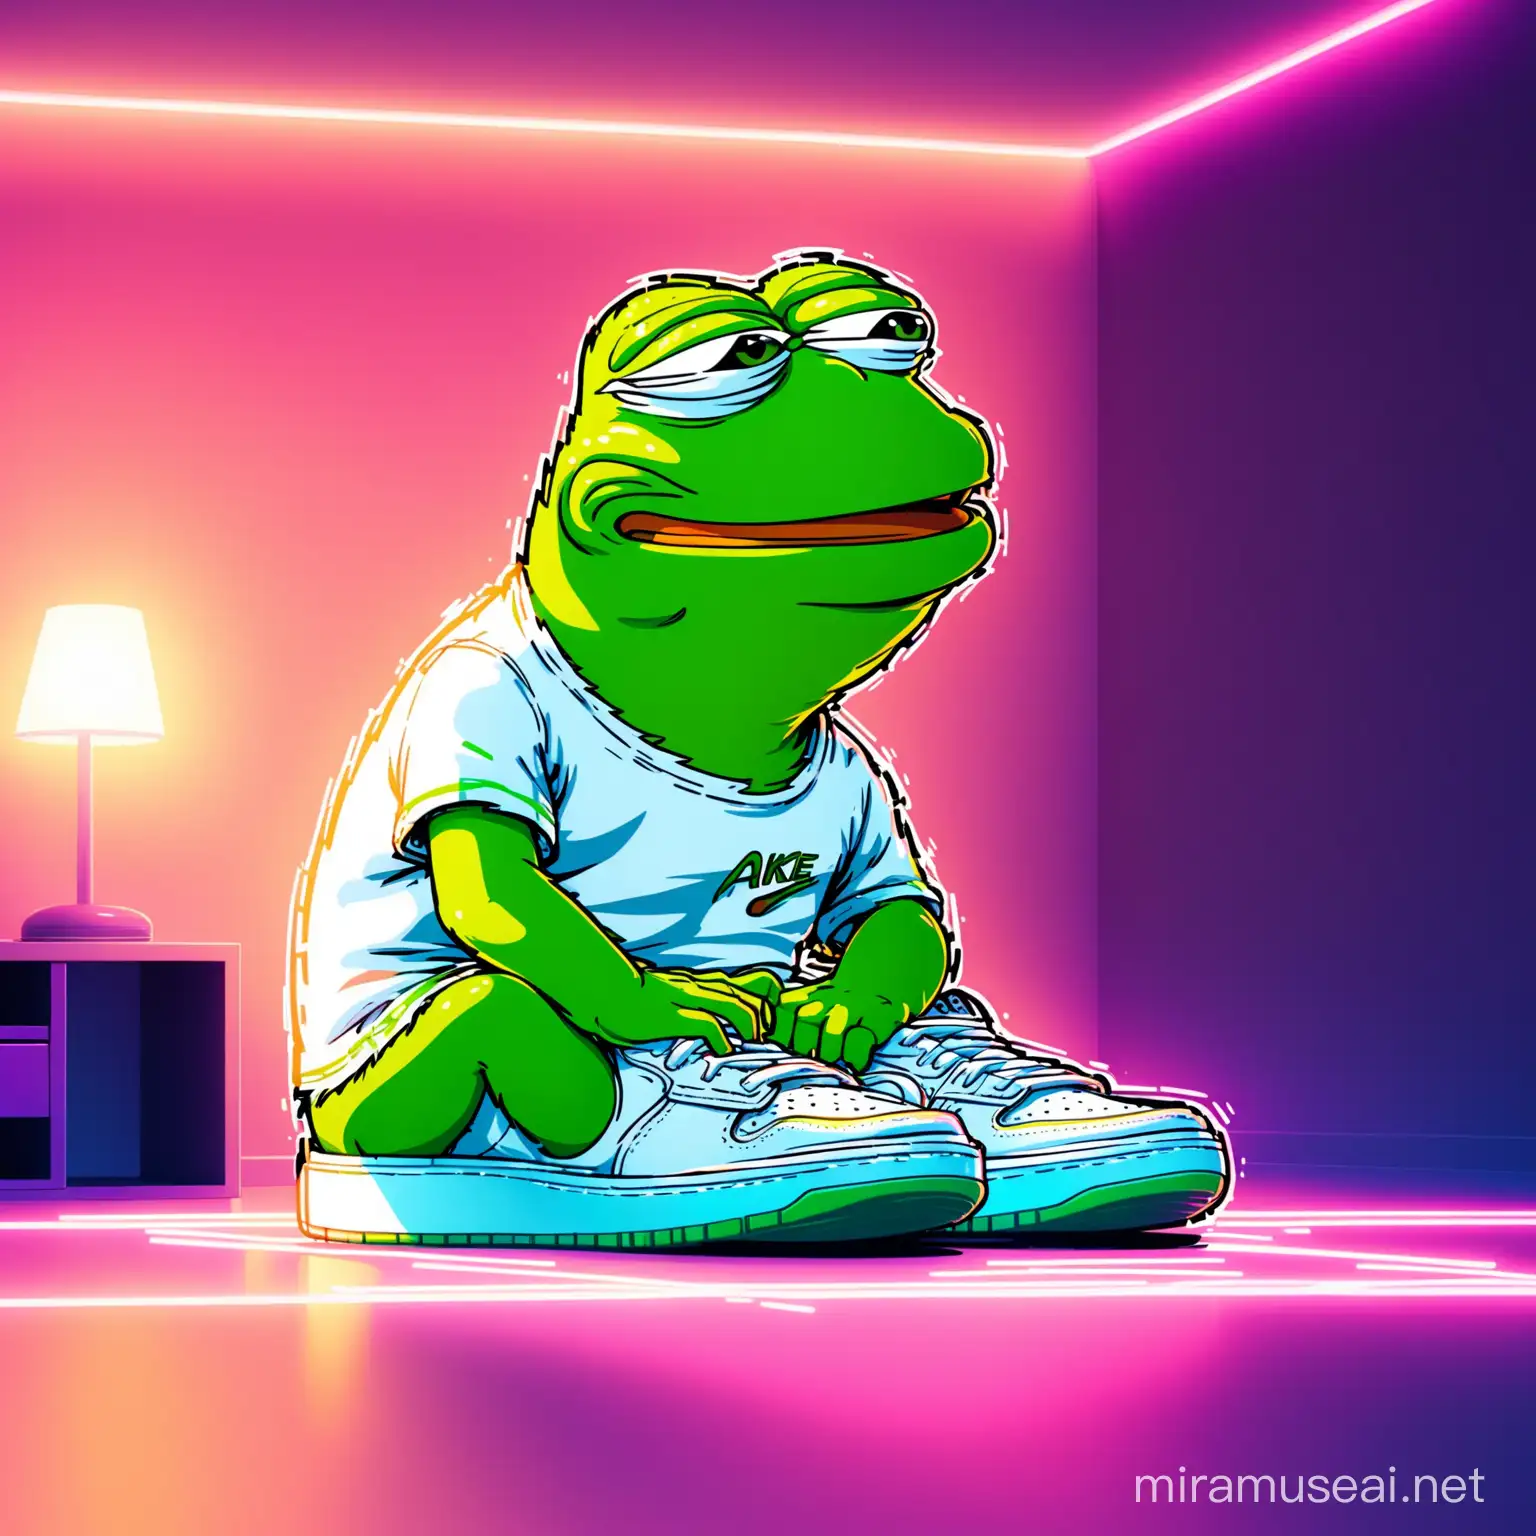 Funny Pepe Meme in Trendy Nike Sneakers Relaxing in a Contemporary Neonlit Space